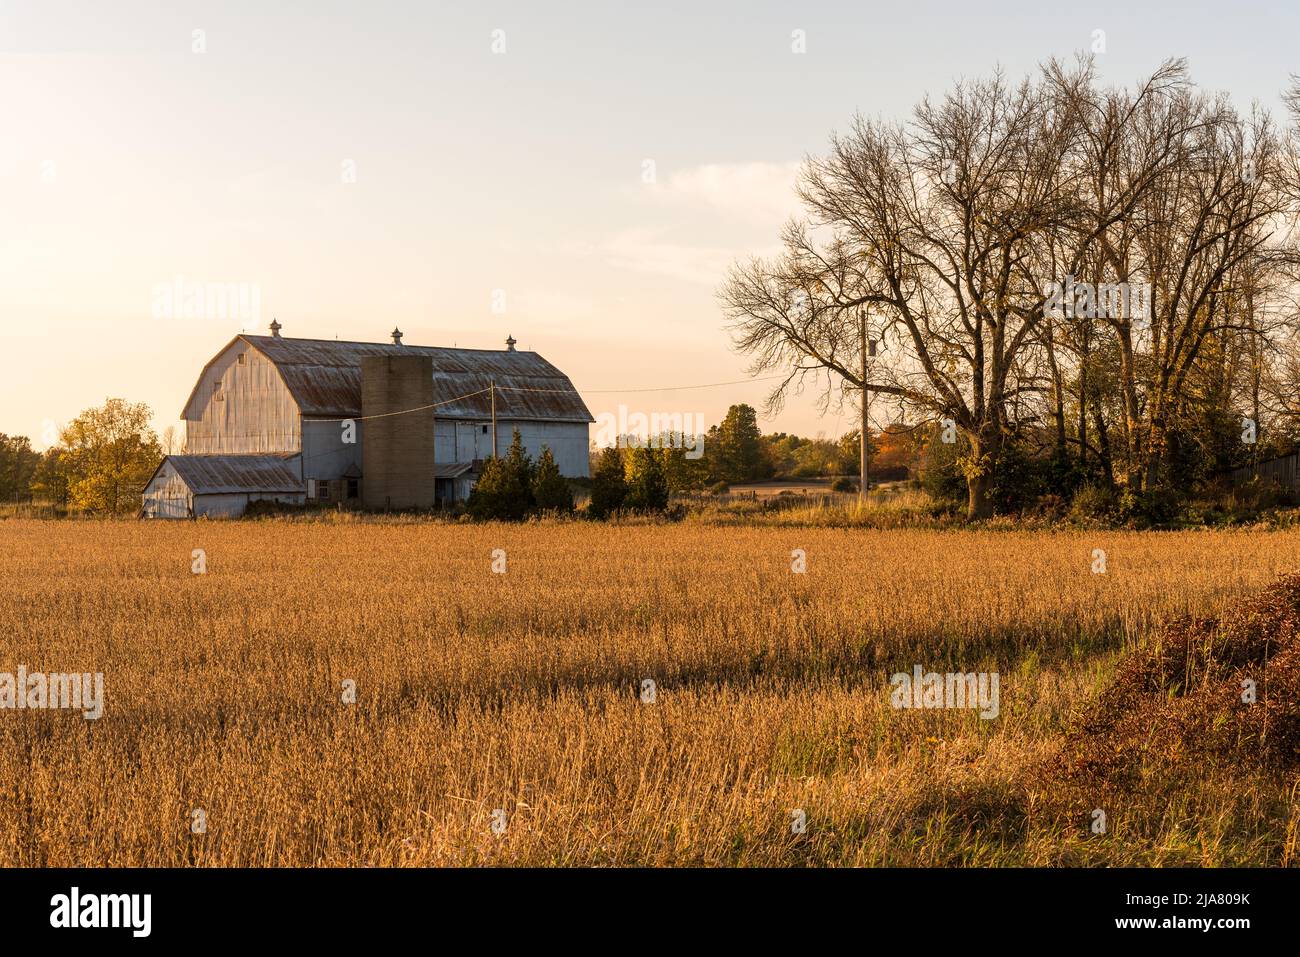 Old metal barn in a rural landscape at sunset in autumn Stock Photo